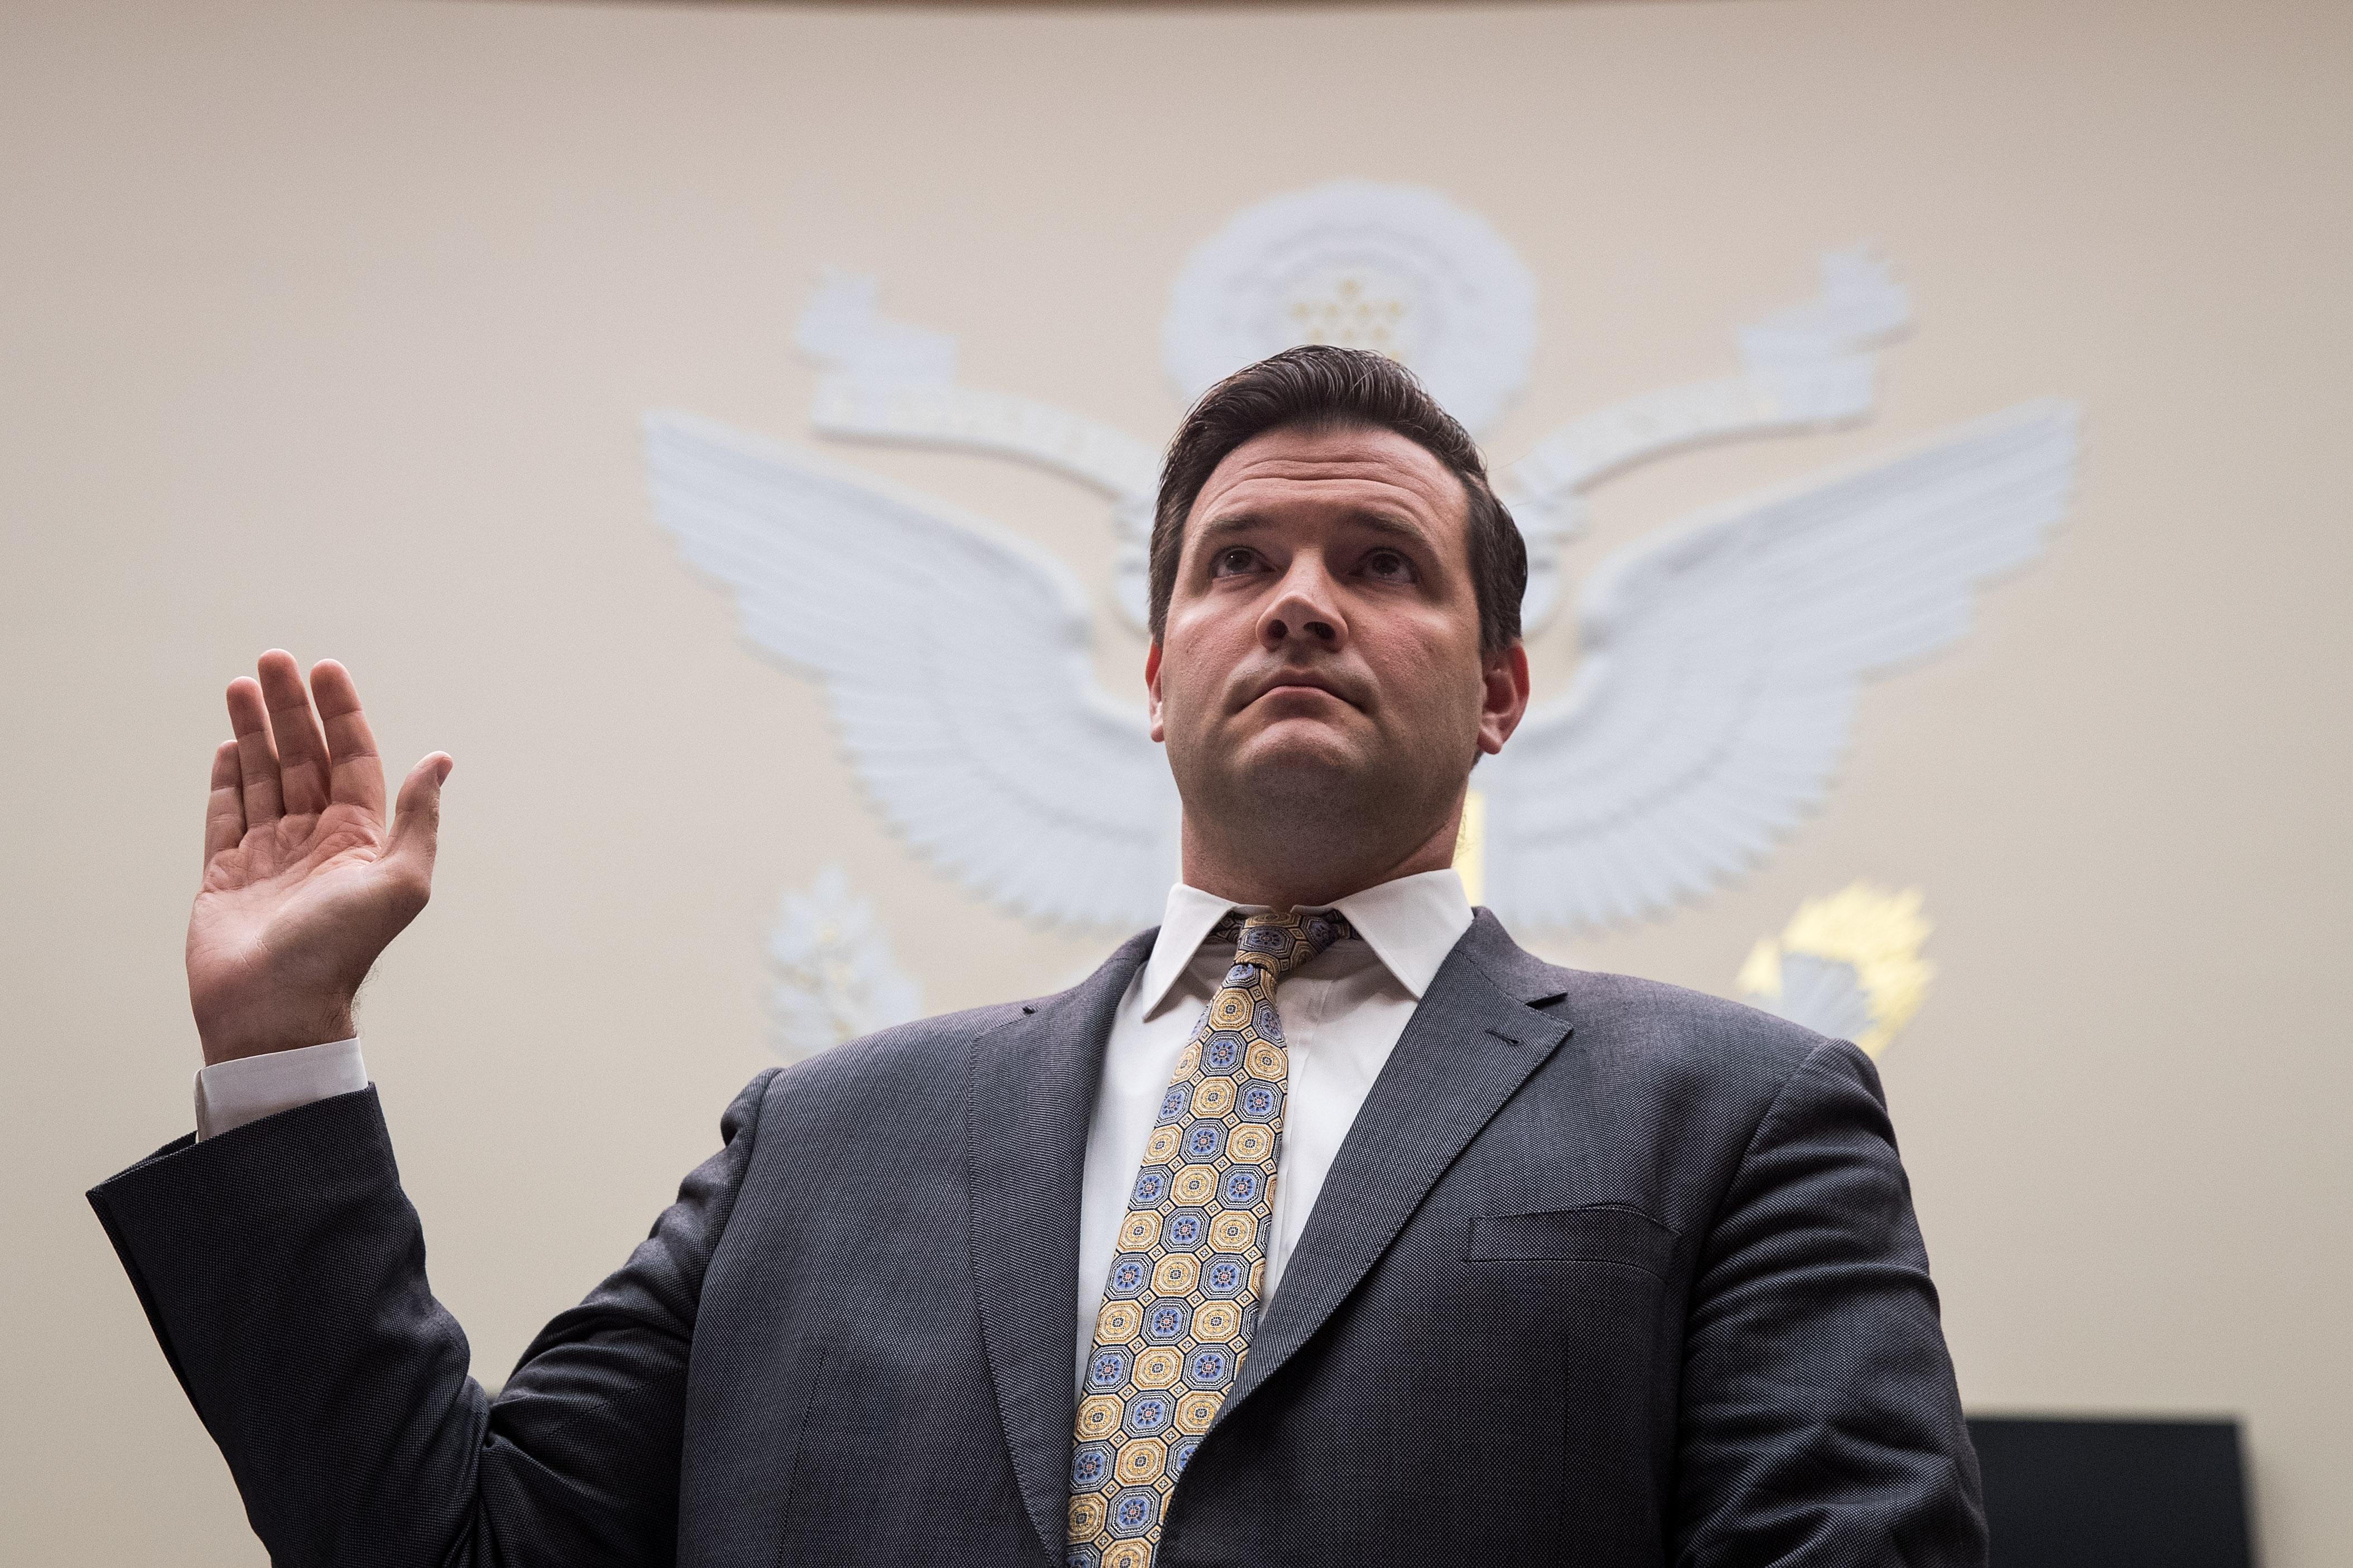 WASHINGTON, DC - OCTOBER 26: Scott Lloyd, director of the Office of Refugee Resettlement at the U.S. Department of Health and Human Services, is sworn-in during a House Judiciary Committee hearing concerning the oversight of the U.S. refugee admissions program, on Capitol Hill, October 26, 2017 in Washington, DC. The Trump administration is expected to set the fiscal year 2018 refugee ceiling at 45,000, down from the previous ceiling at 50,000. It would be the lowest refugee ceiling since Congress passed the Refugee Act of 1980. (Photo by Drew Angerer/Getty Images)